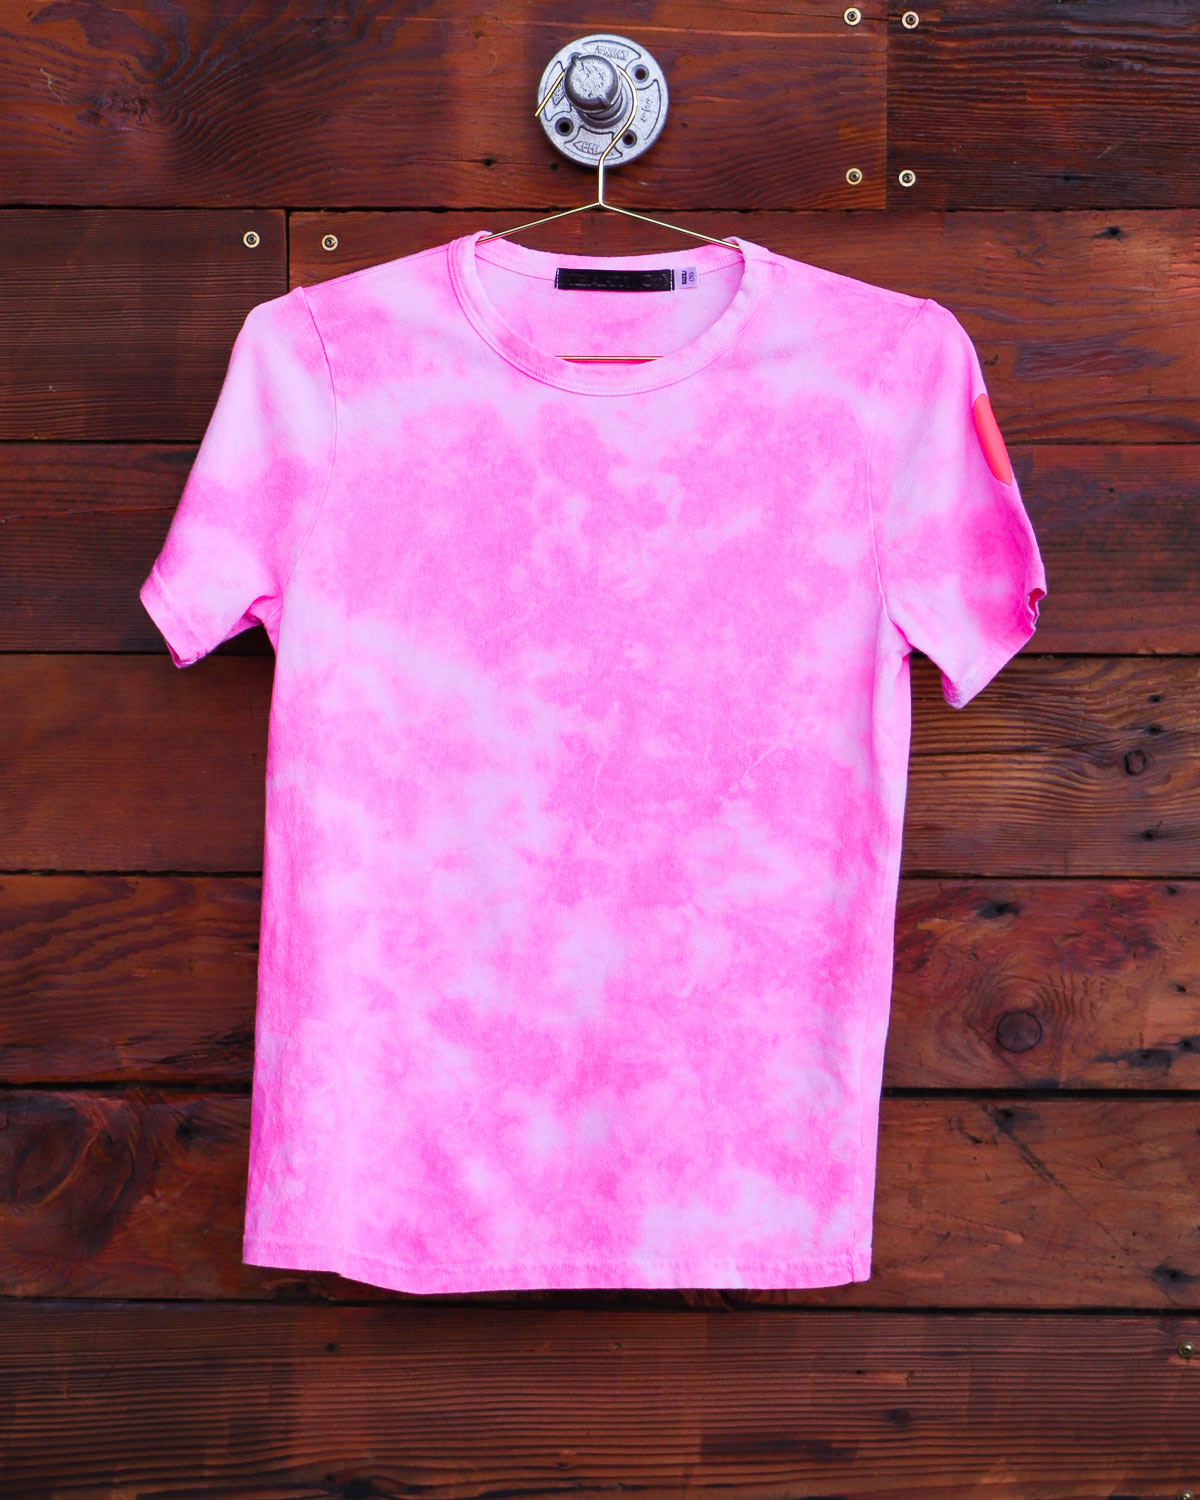 Pink hand-dyed tie dye t-shirt hanging on wood wall